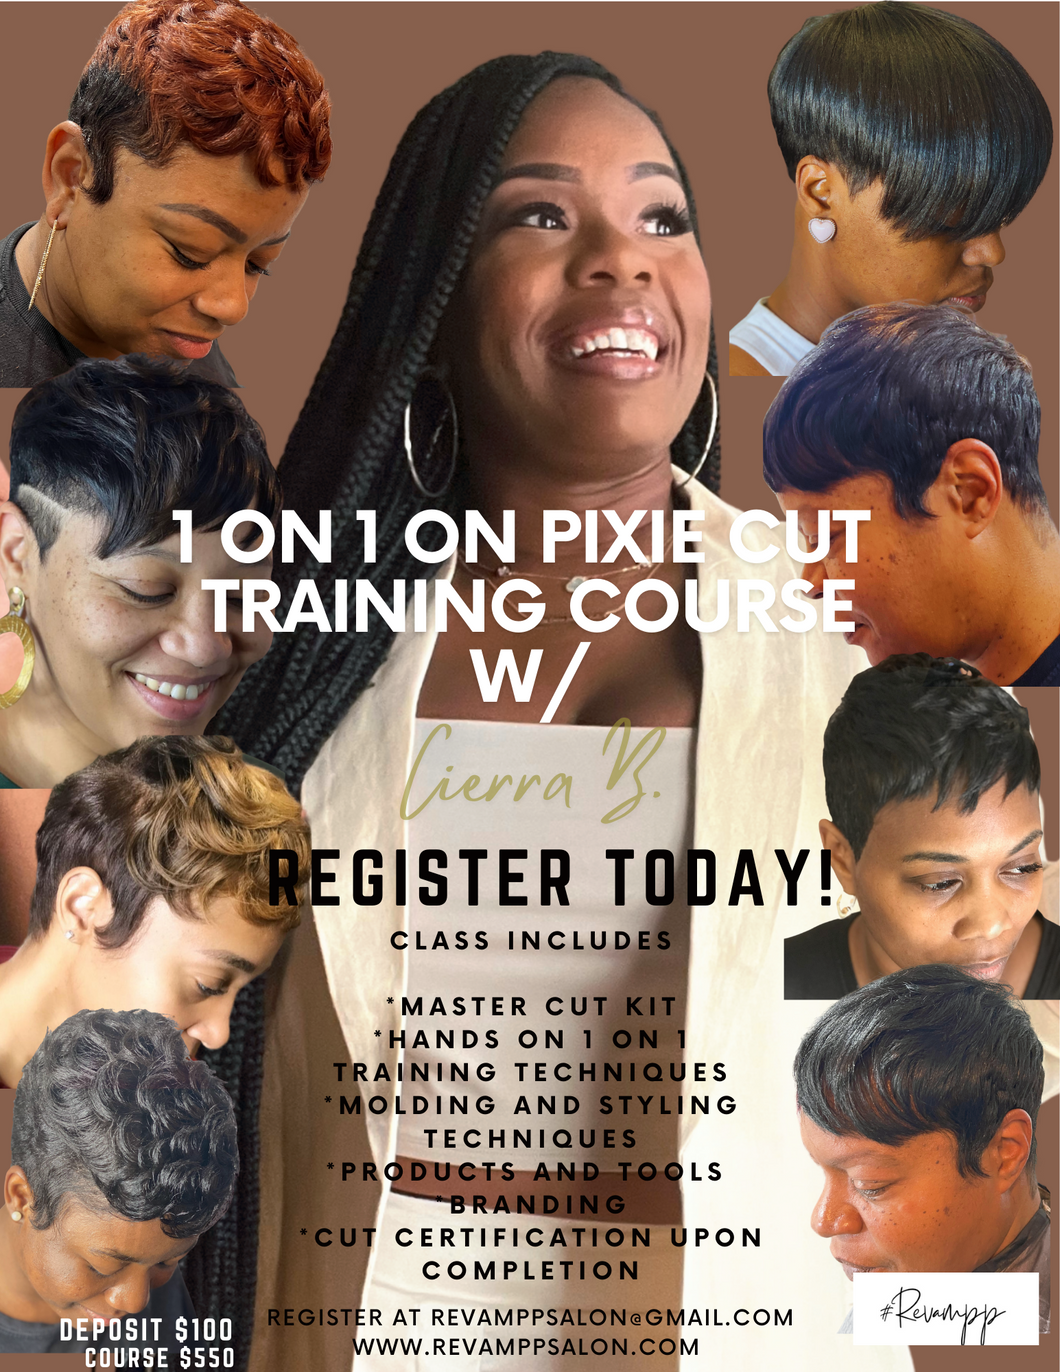 1 on 1 Pixie Cut Training Course